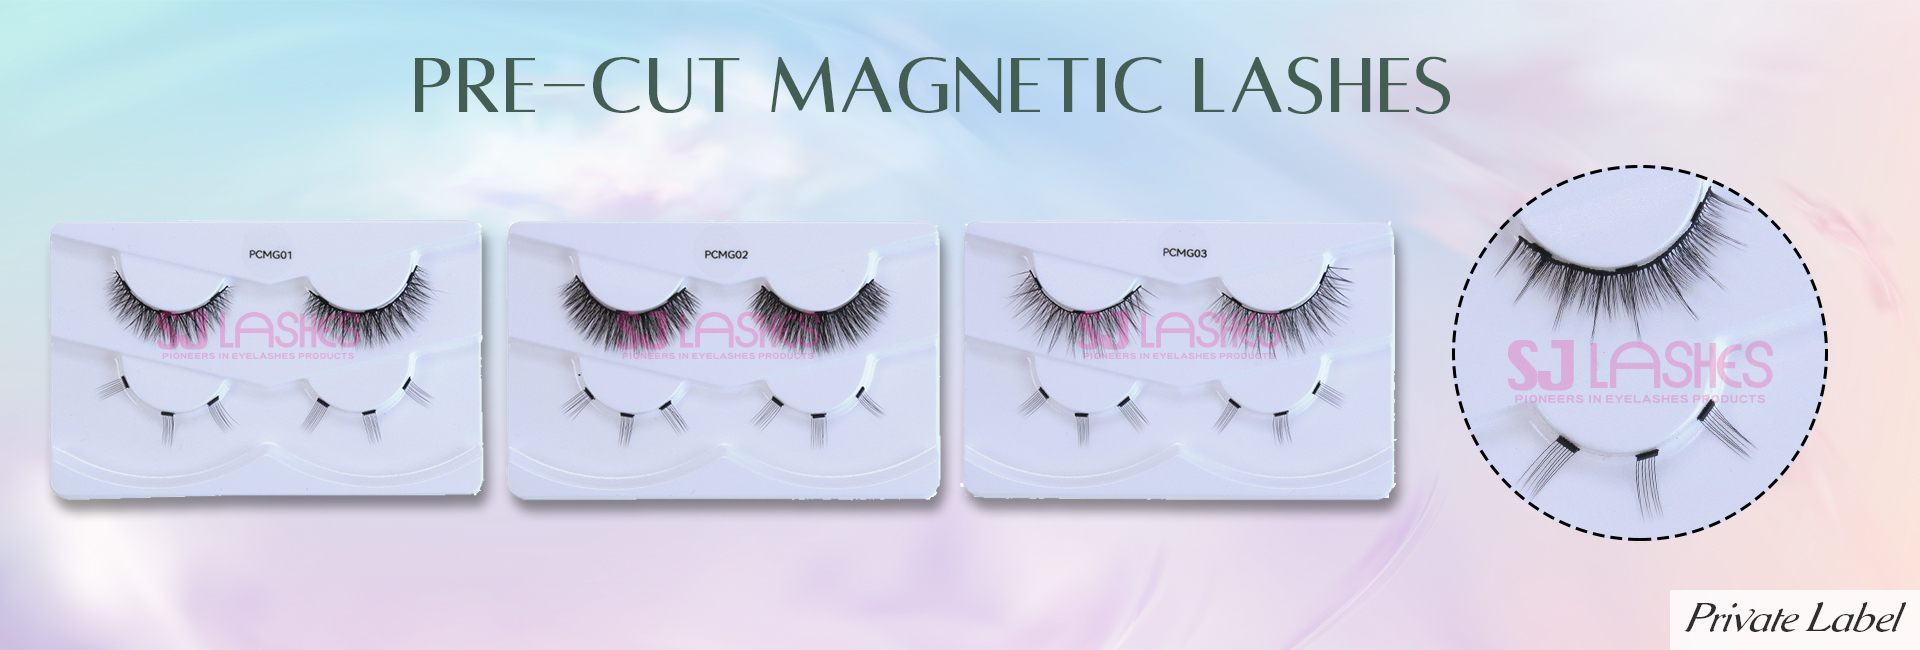 Pre-Cut Magnetic Lashes